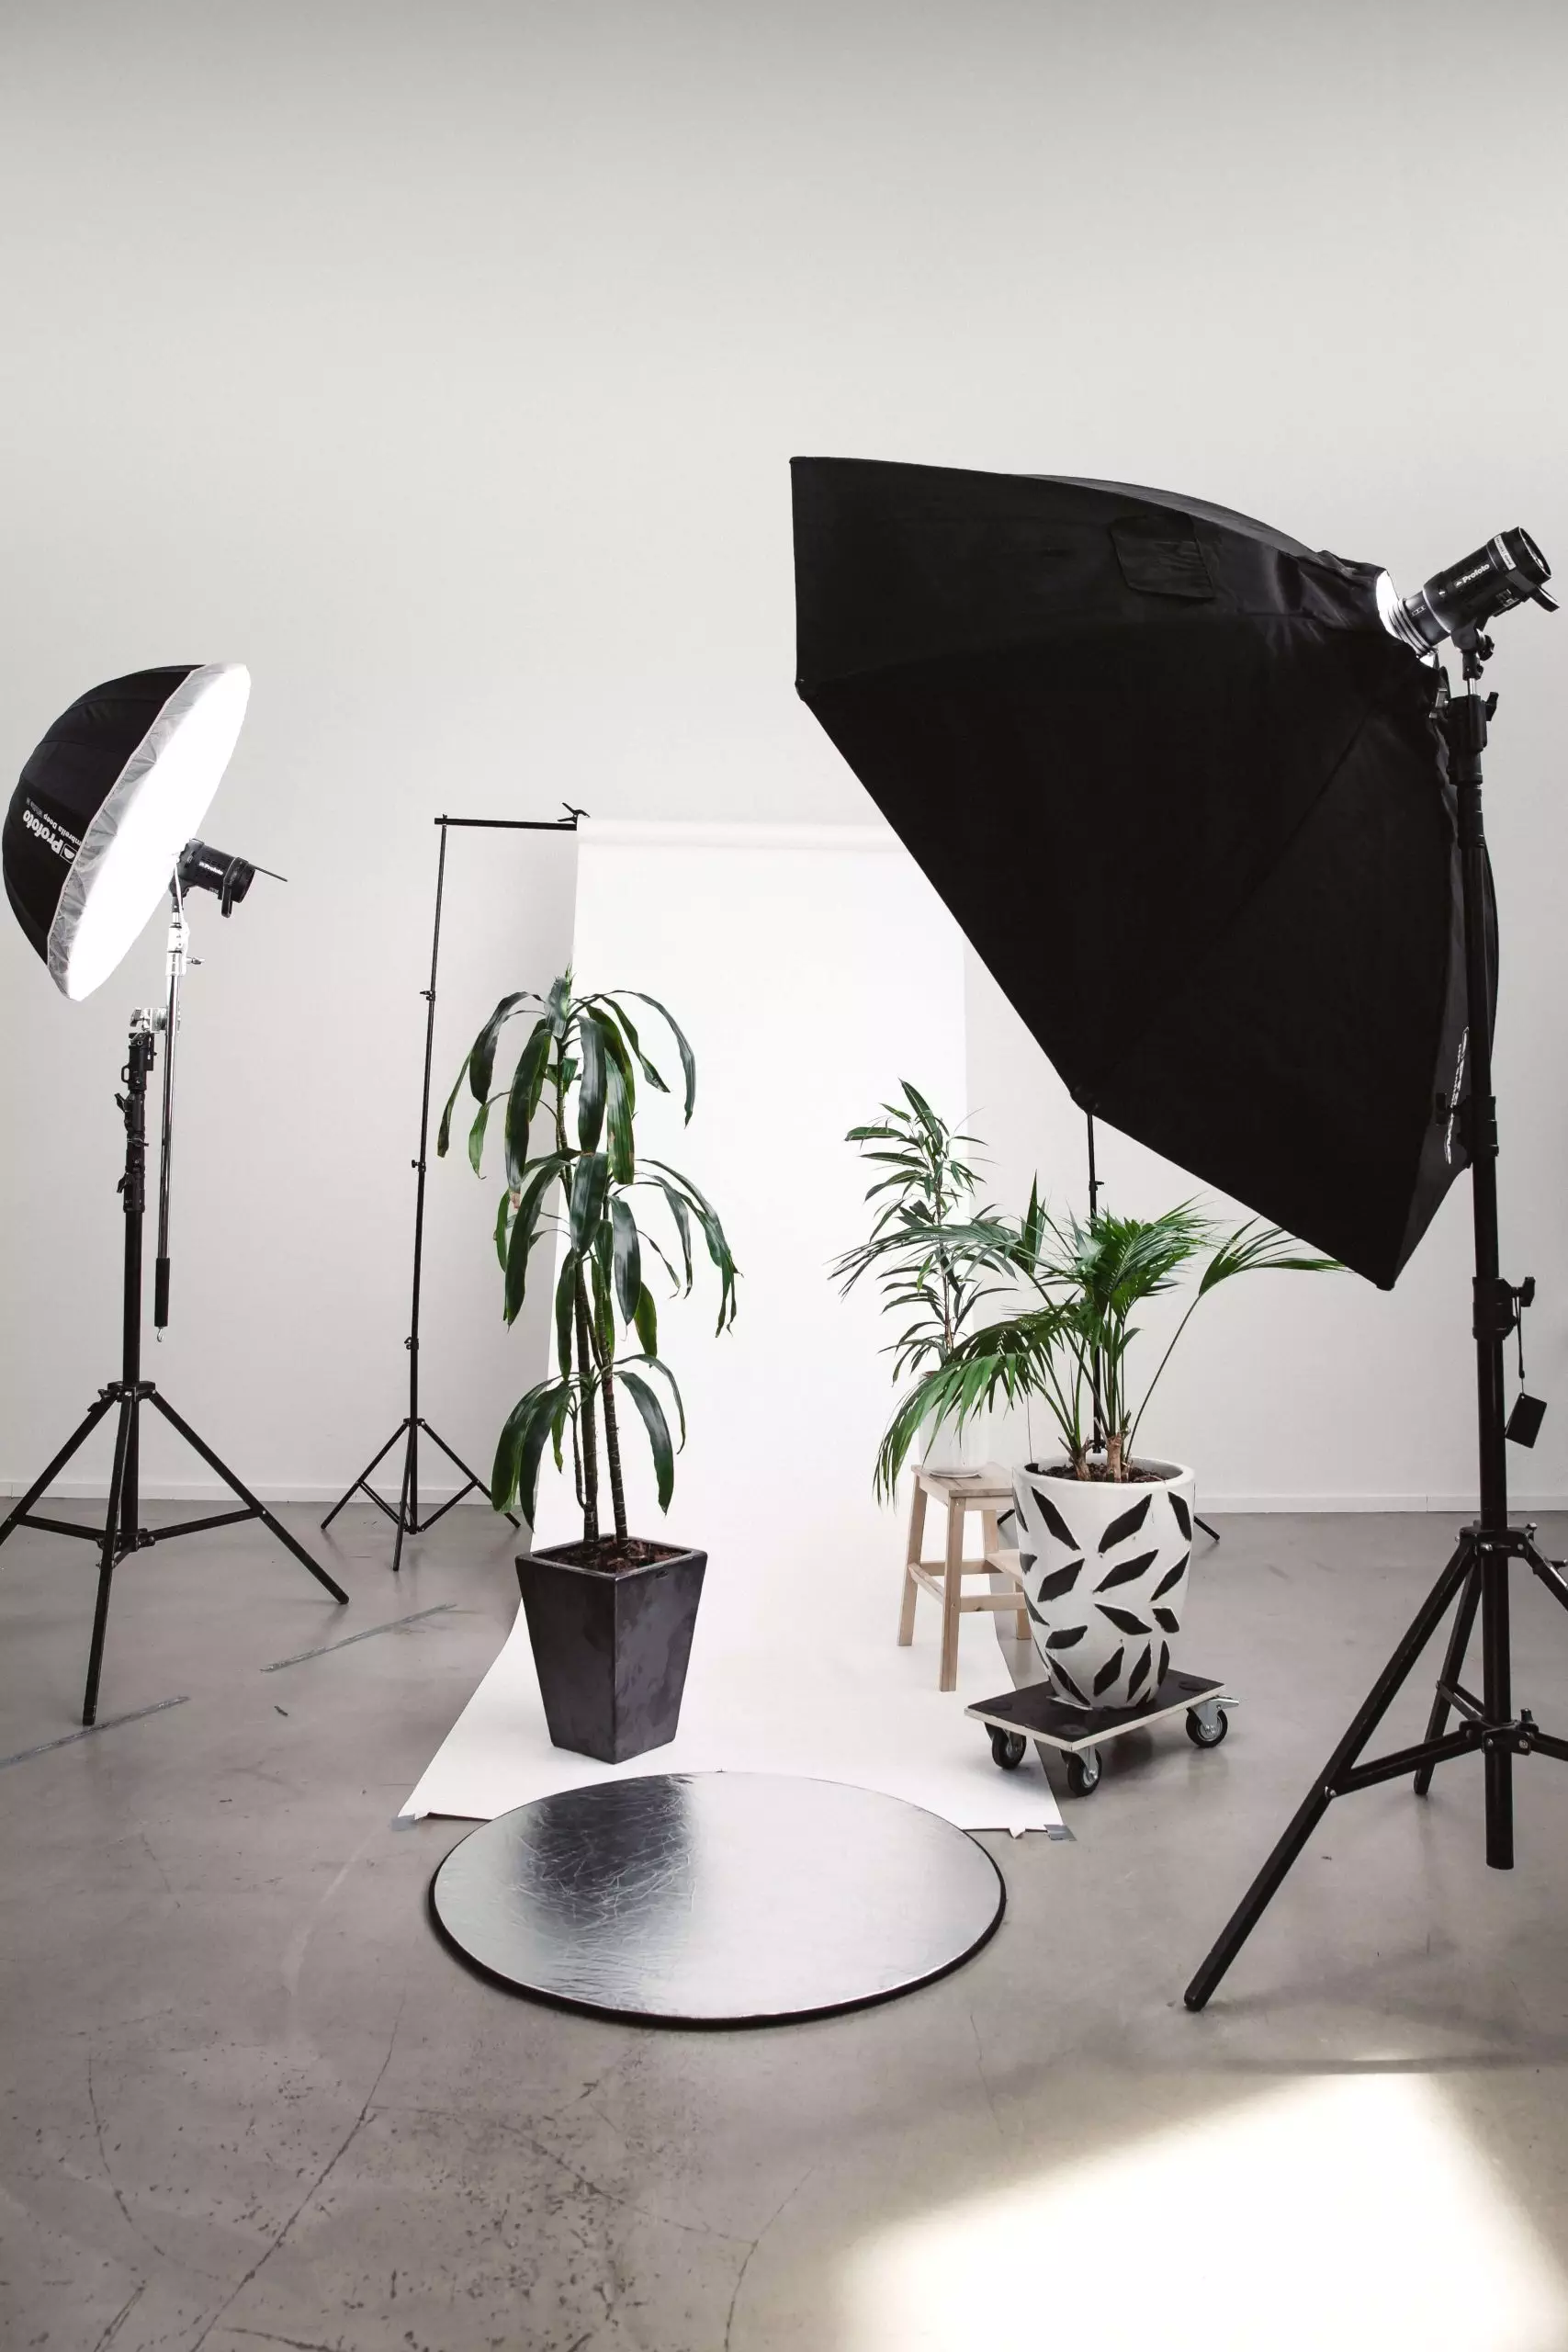 photography-setup-with-lighting-white-background-and-decorative-plants